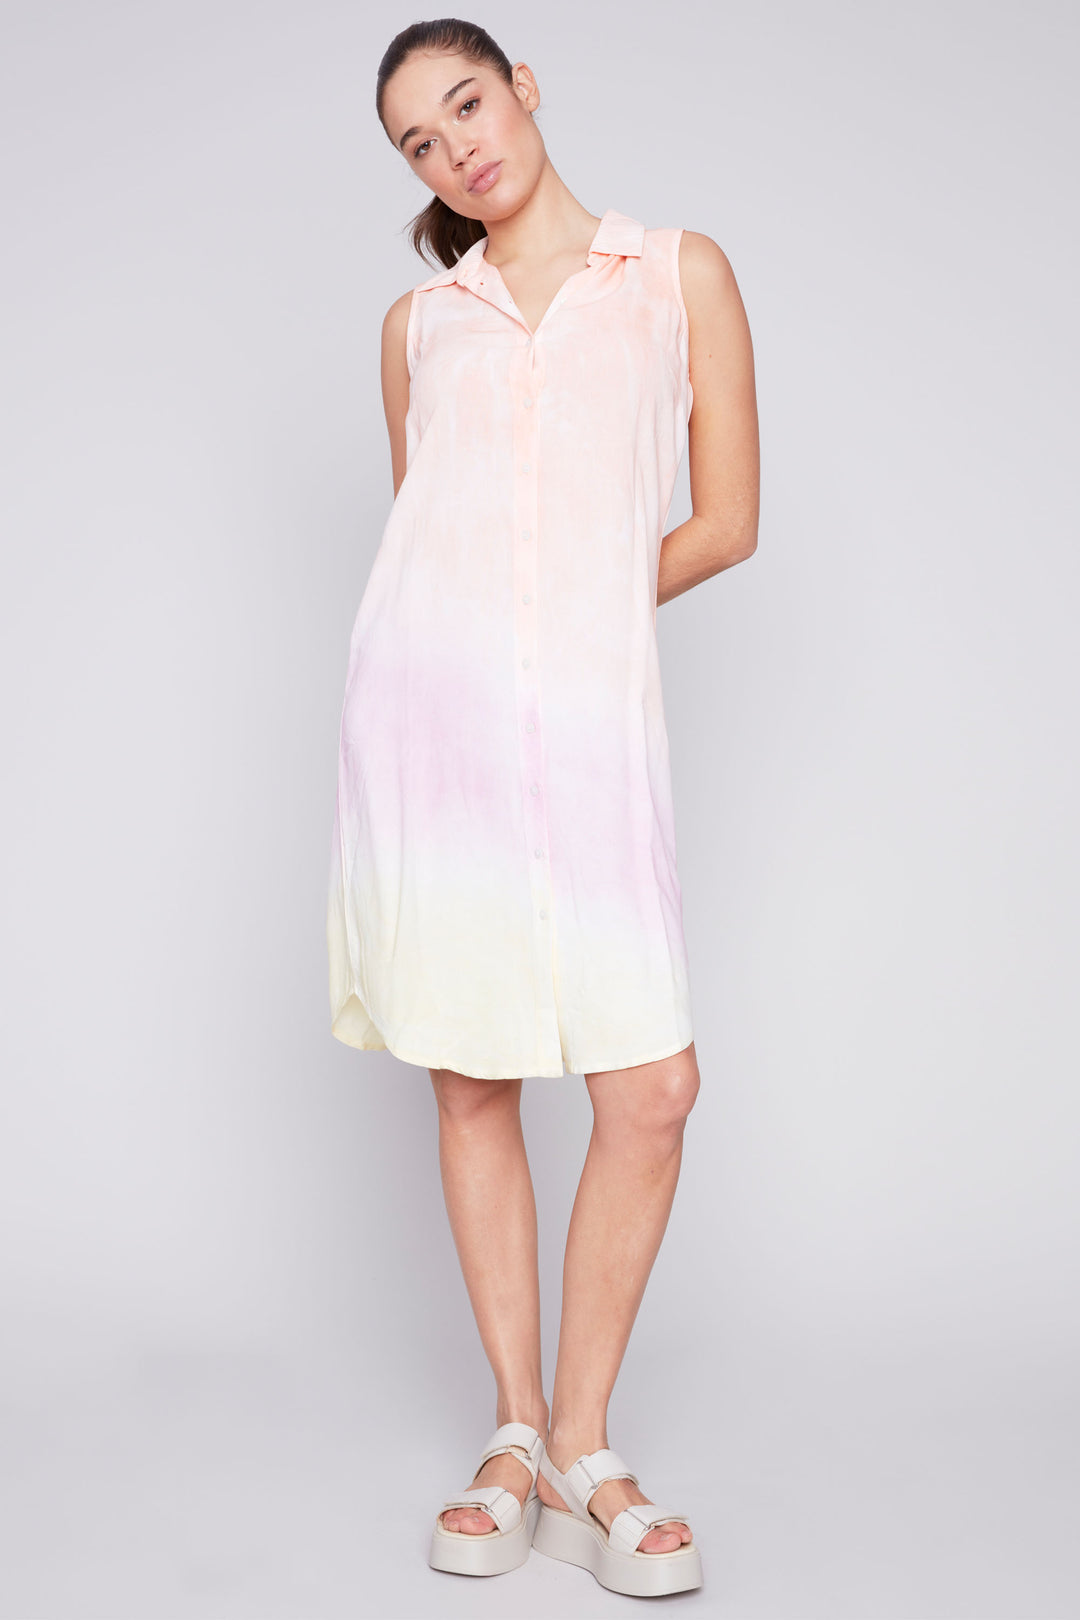 Charlie B Summer 2024 Its duster design and light, flowy fabric make it perfect for warmer days, while the tiedye print adds a touch of bohemian charm. 